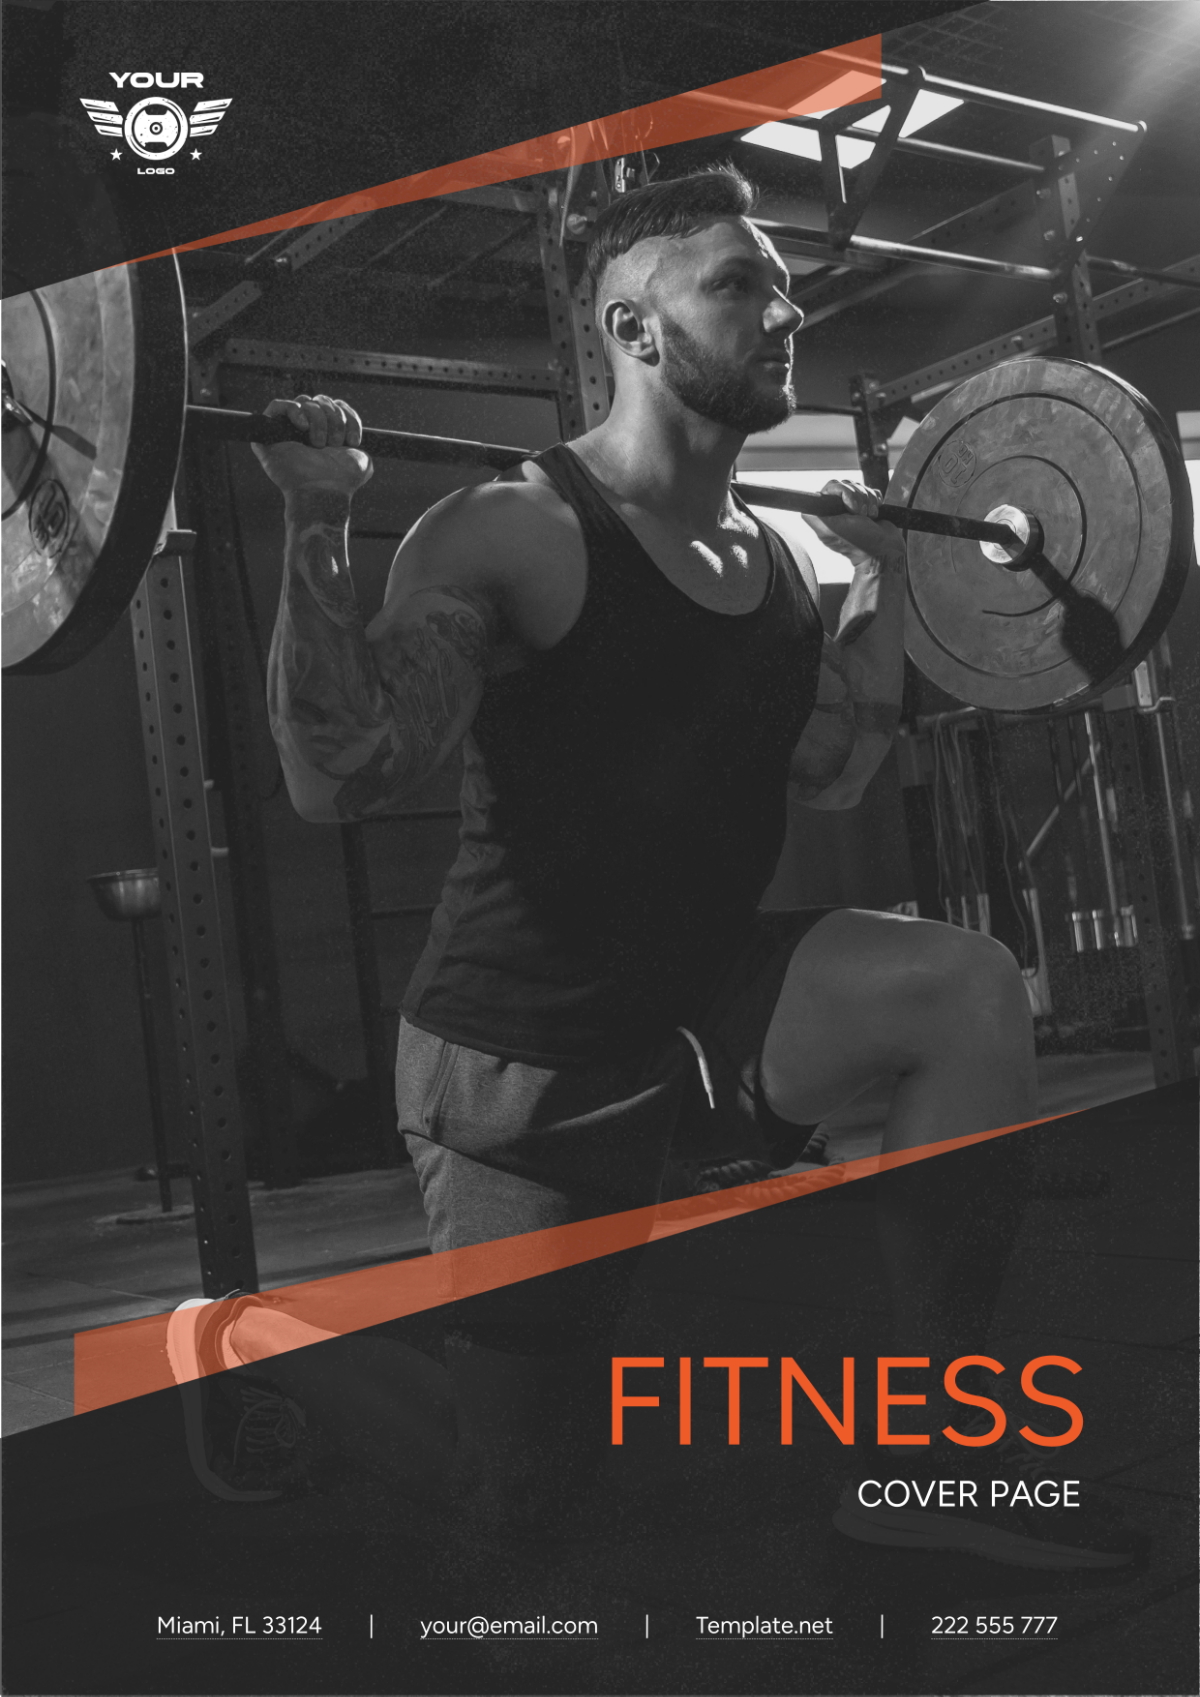 Fitness Center Business Cover Page Template